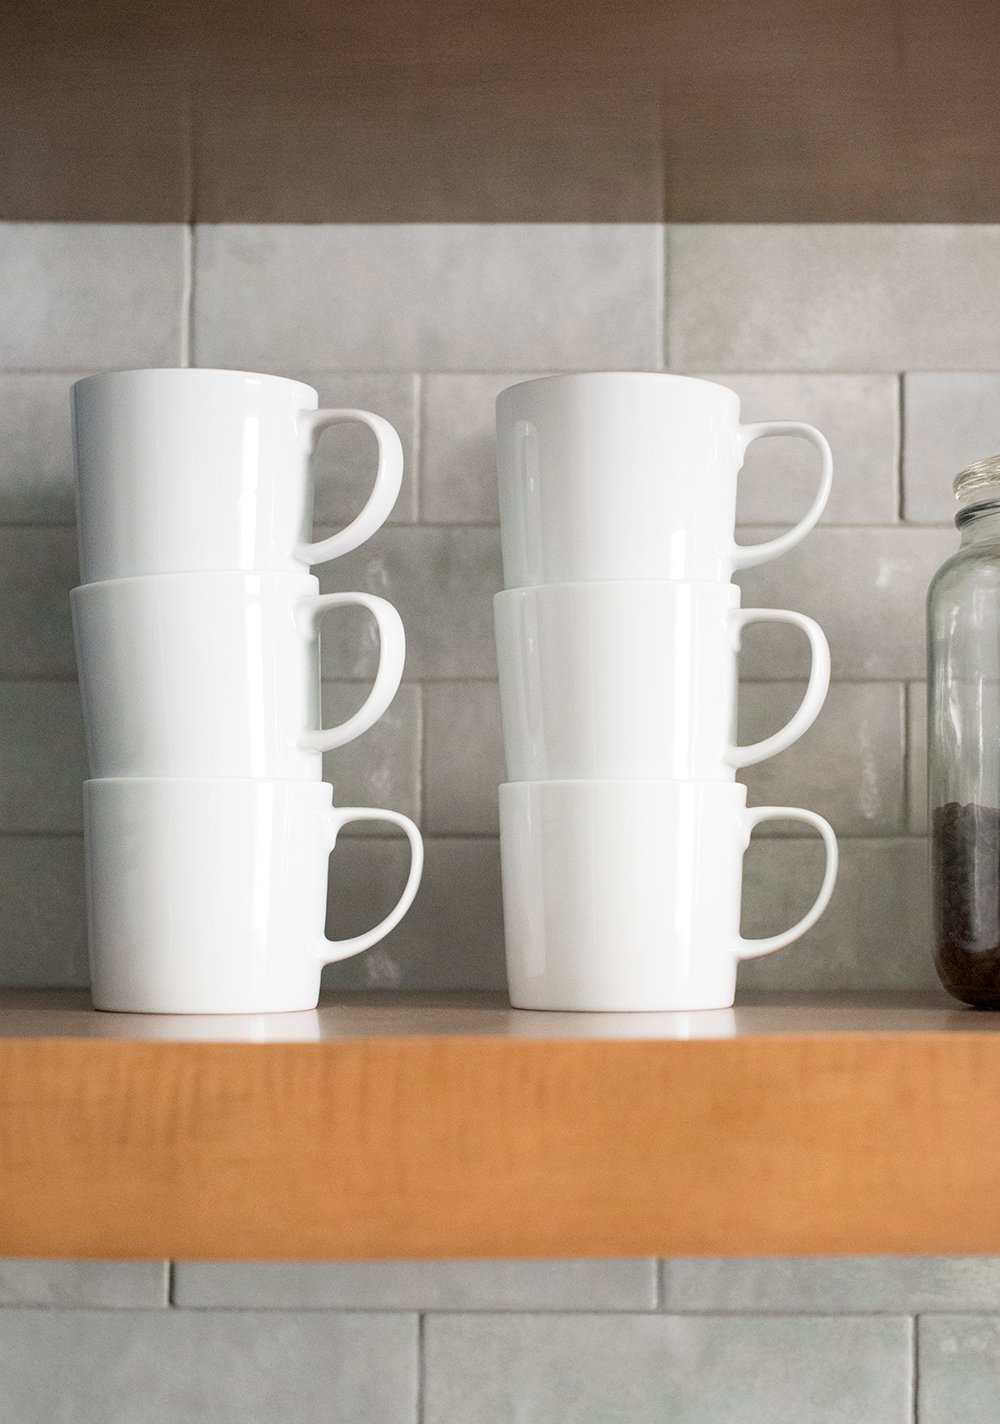 My Dishes, Glassware, & Kitchenware (+A Printable Registry Checklist) - roomfortuesday.com